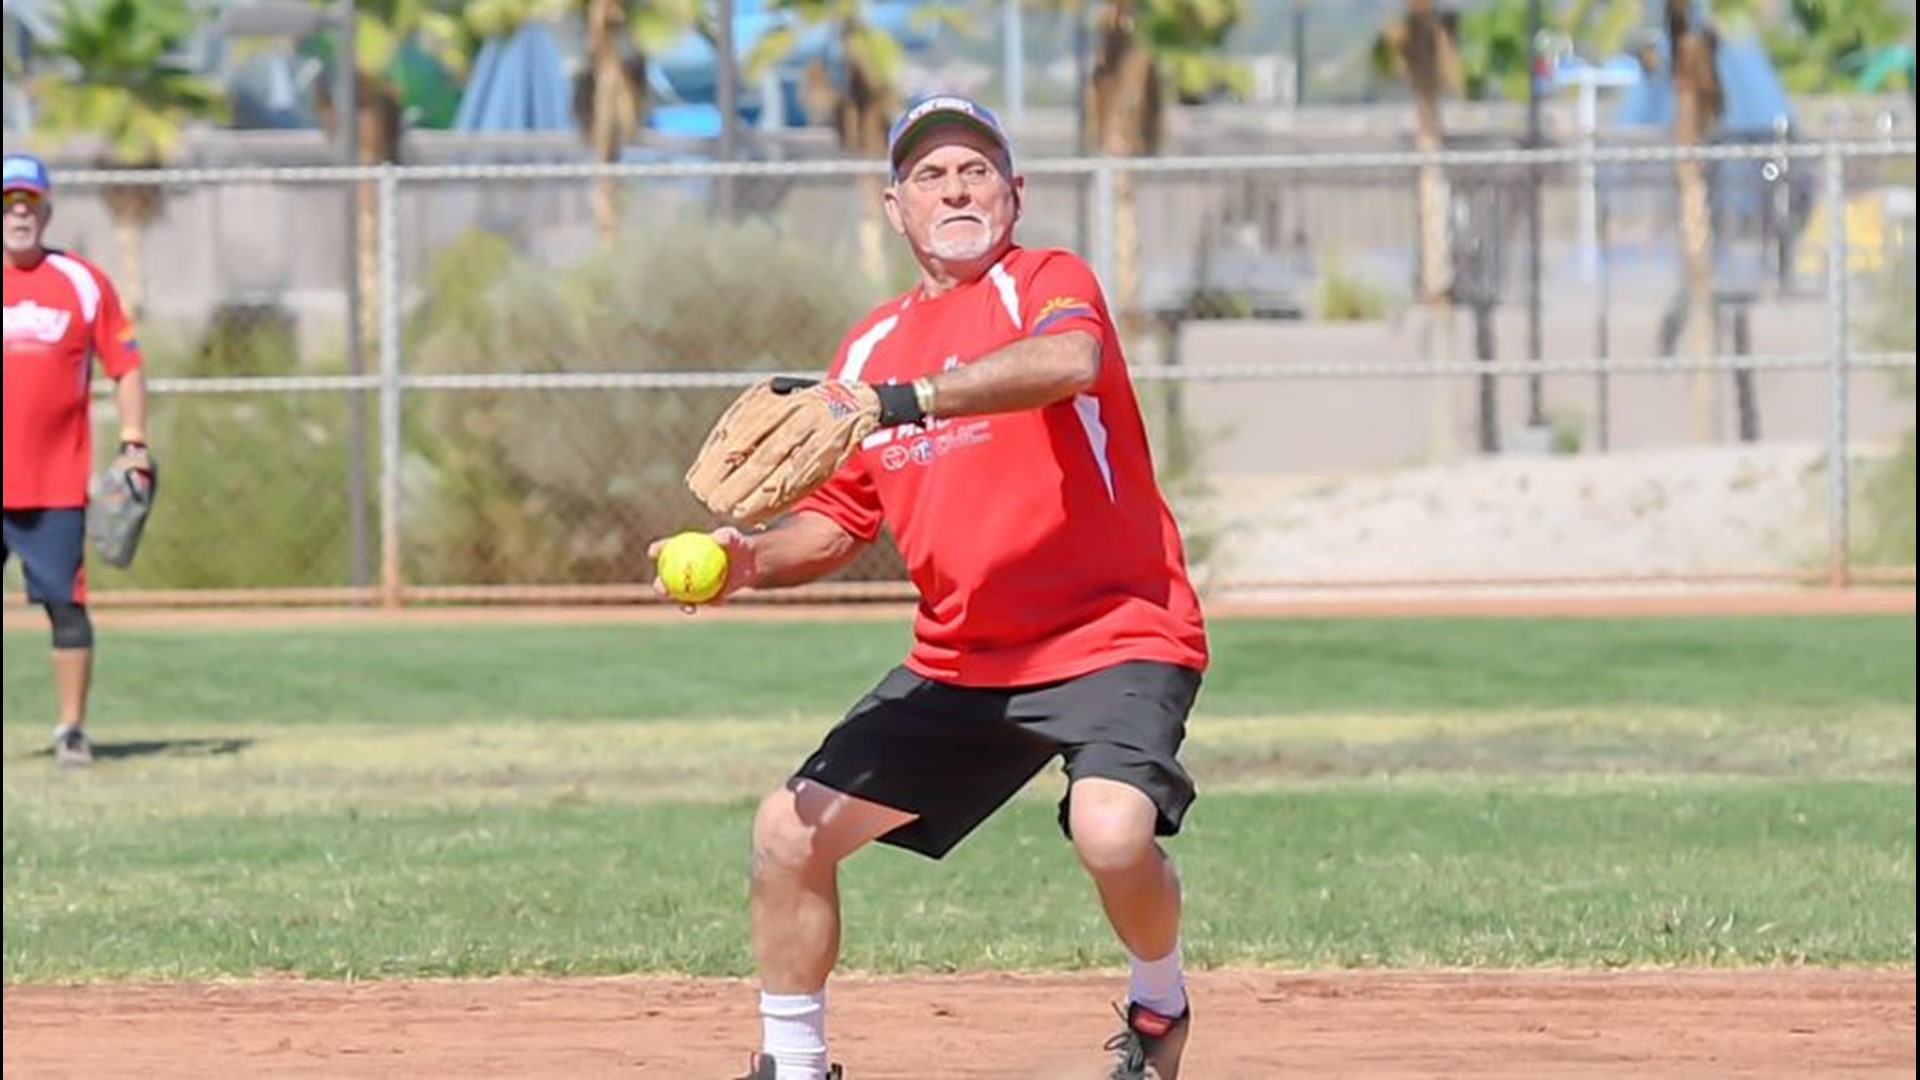 Rogers said Senior Softball USA collaborated with three other senior organizations to determine safety guidelines based off CDC and NCAA recommendations.